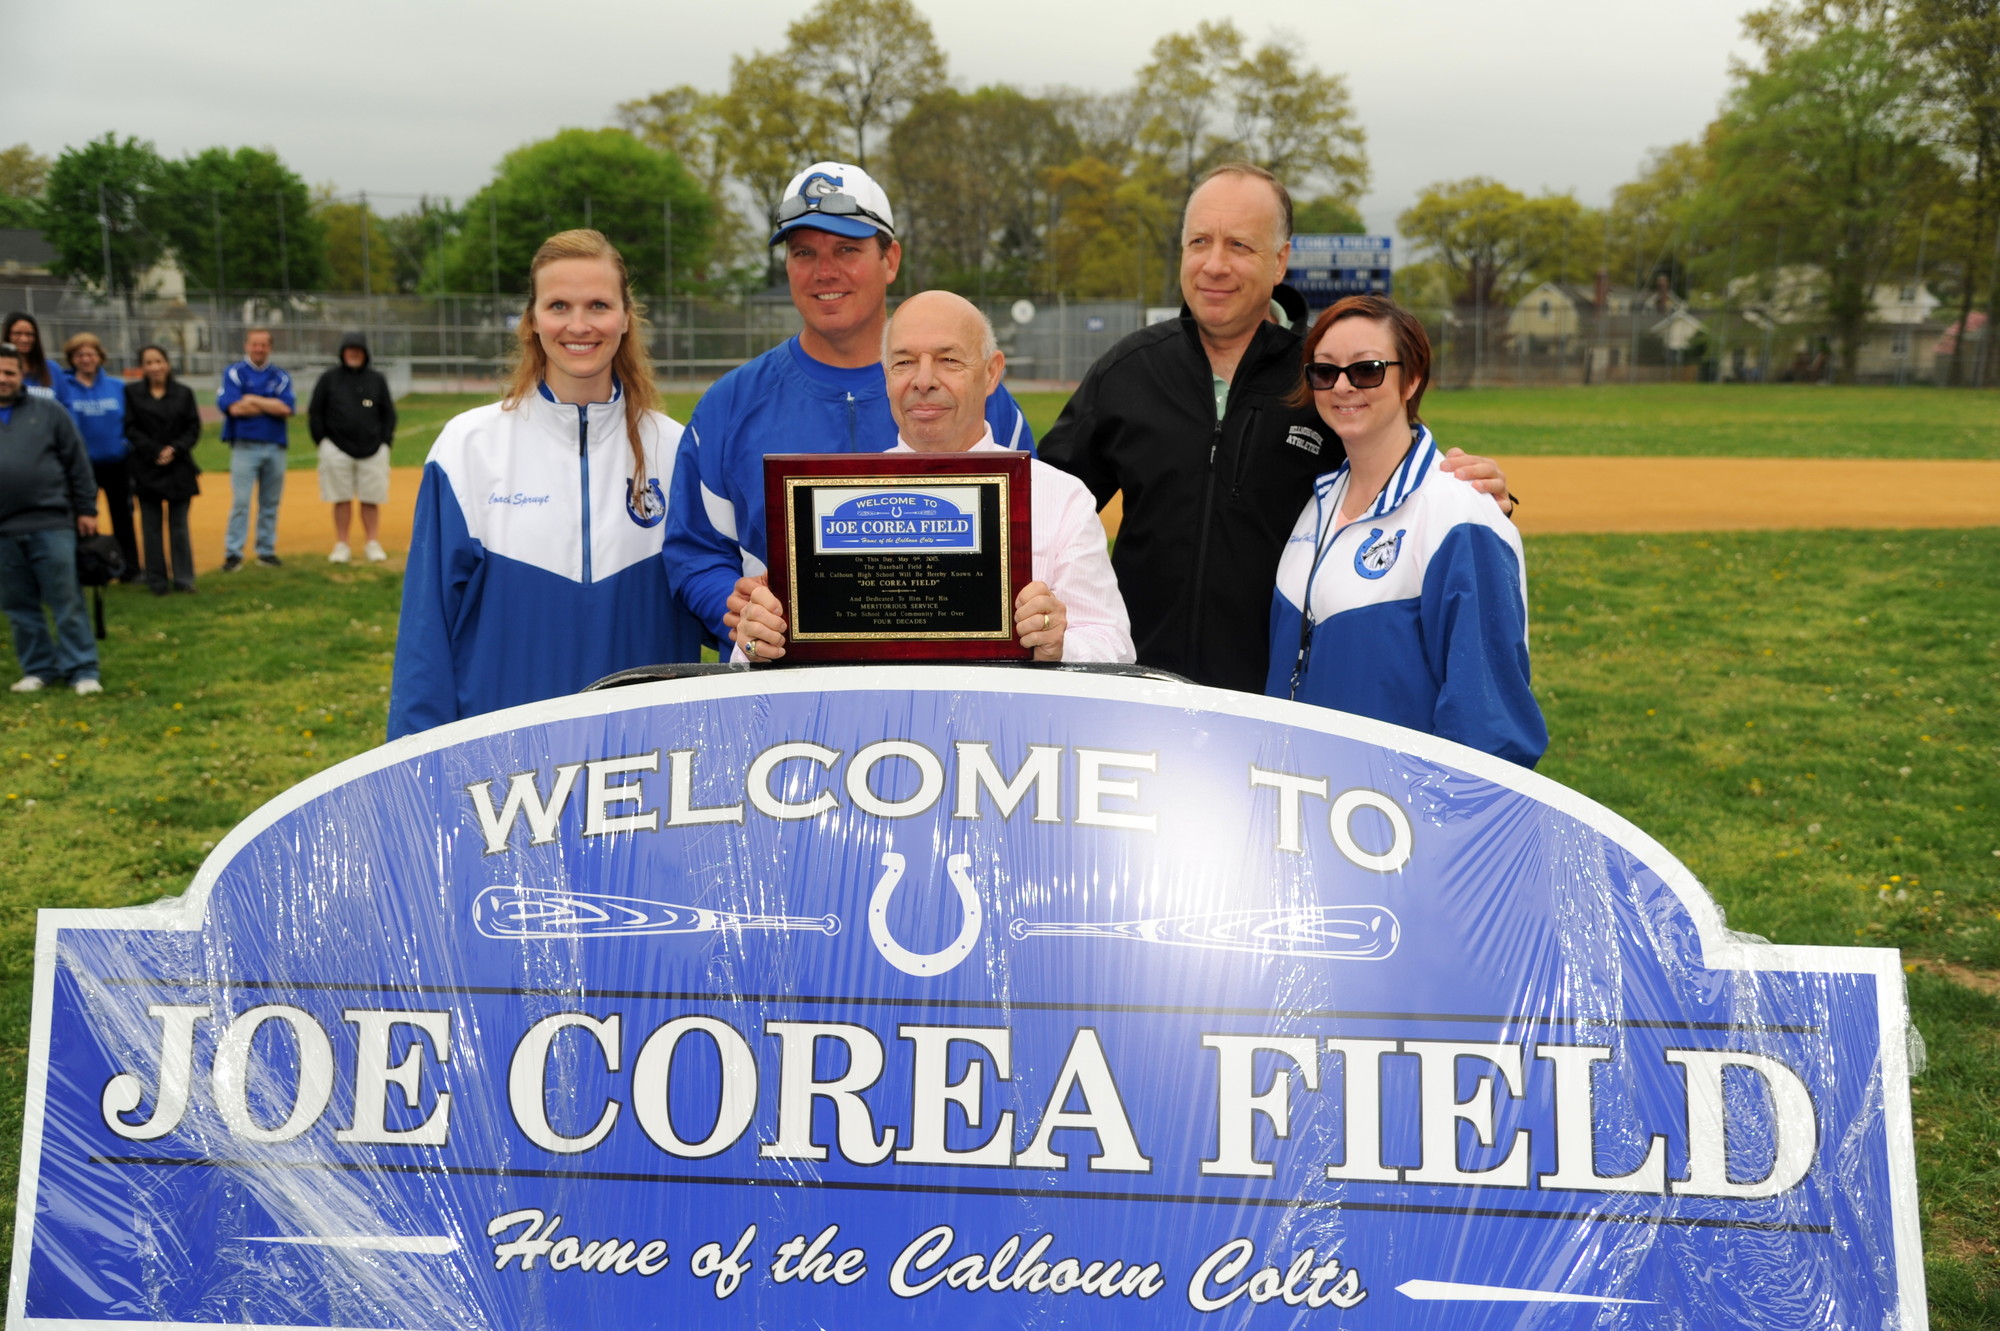 On May 9, Calhoun High School rededicated its baseball diamond as the Joe Corea Field, named for the Colts’ legendary baseball coach of 46 years. Corea, now 71 and retired, took part in the ceremony with his family and many from the Calhoun community.